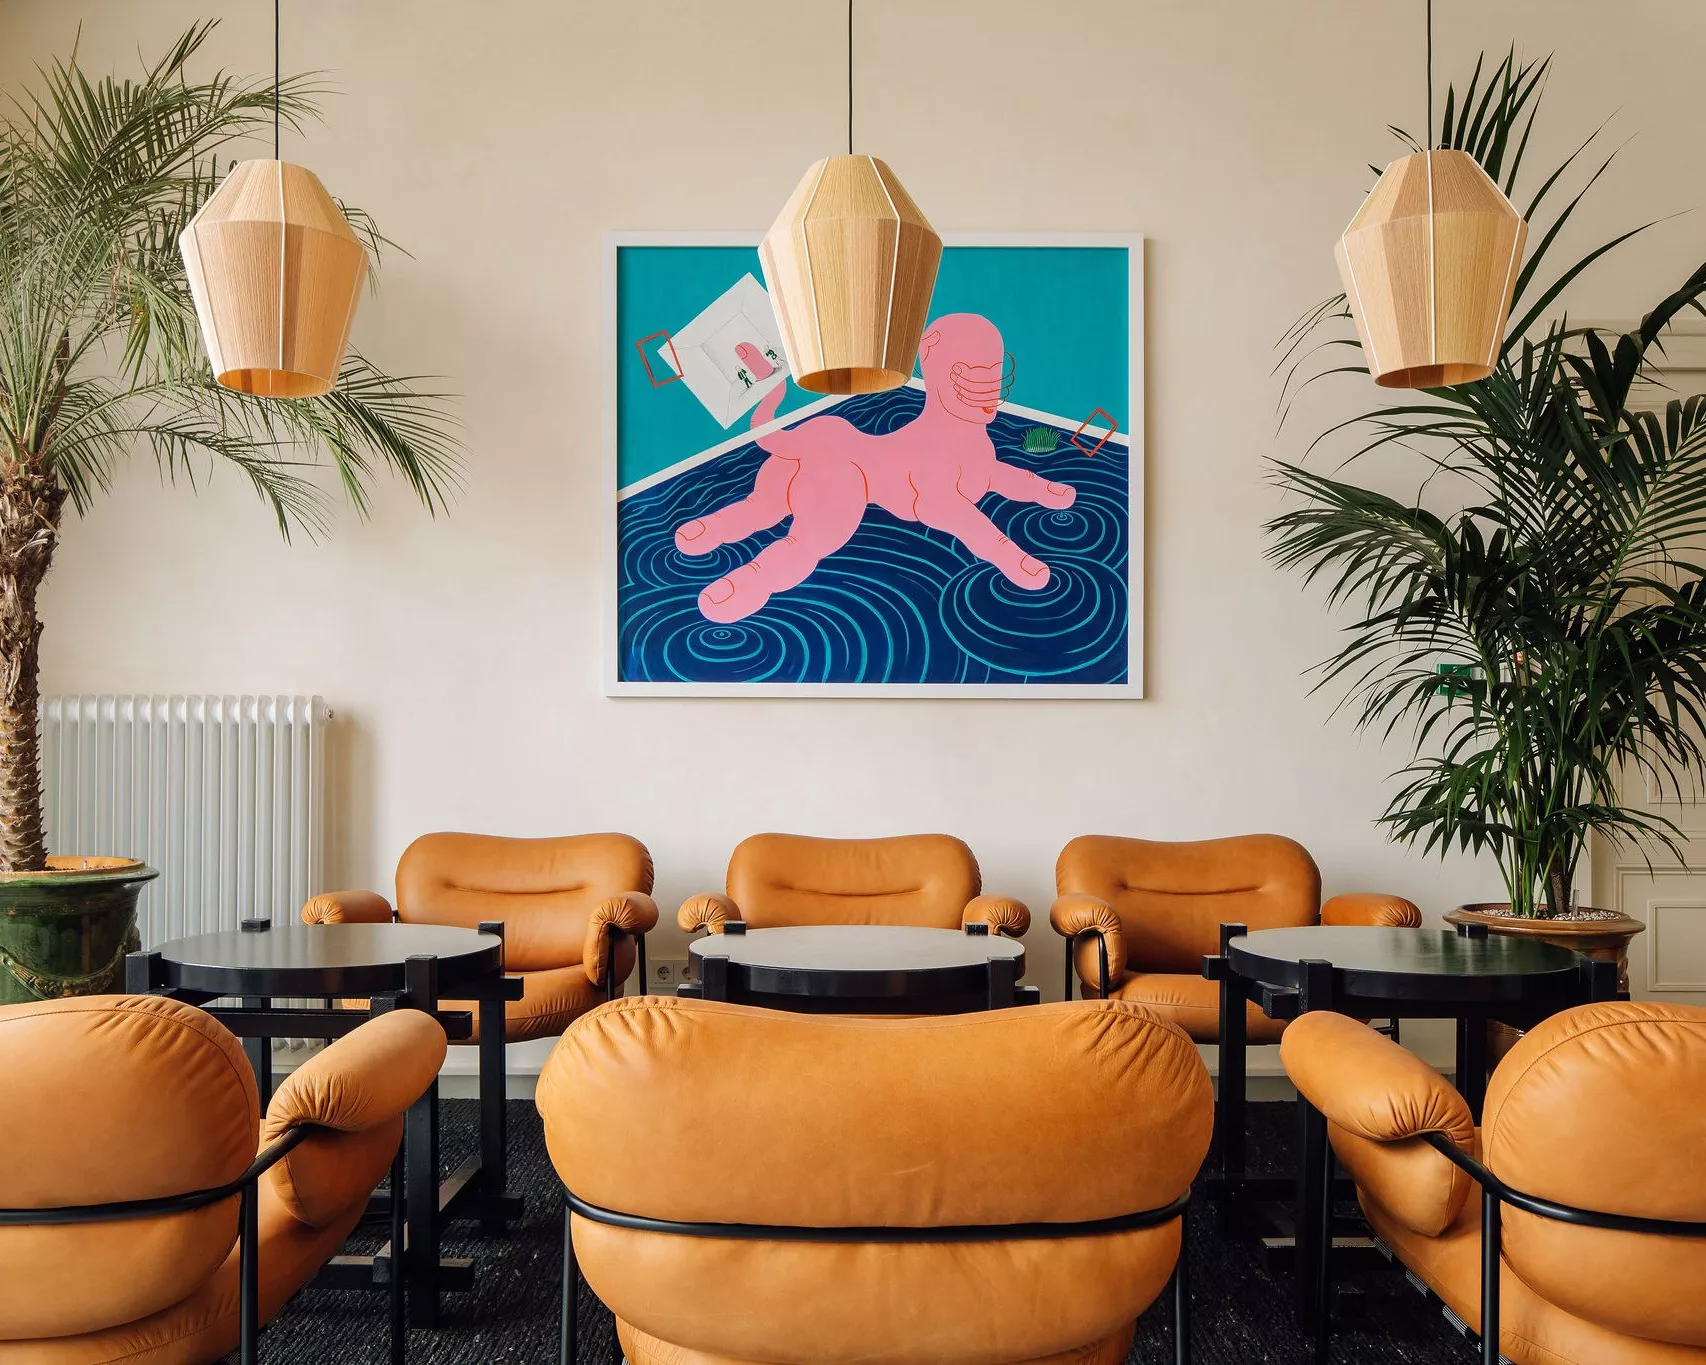 The best co-working spaces in Amsterdam for remote working | Orange arm chairs with black tables with a pink and blue painting on the wall.